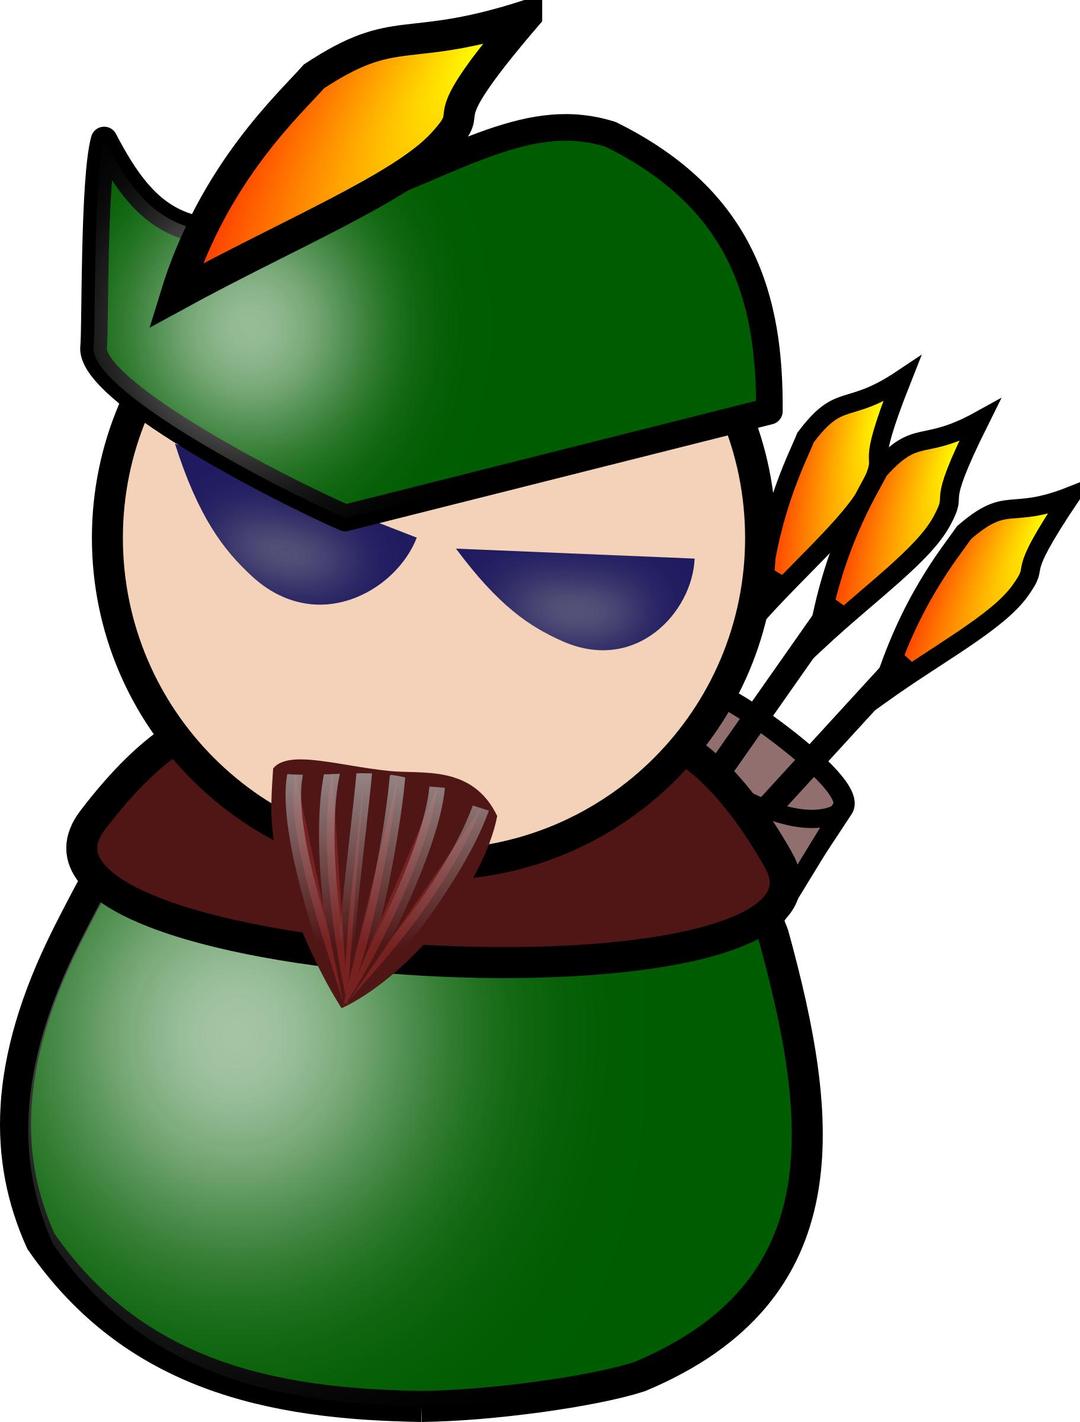 Robin Hood User Picture png transparent